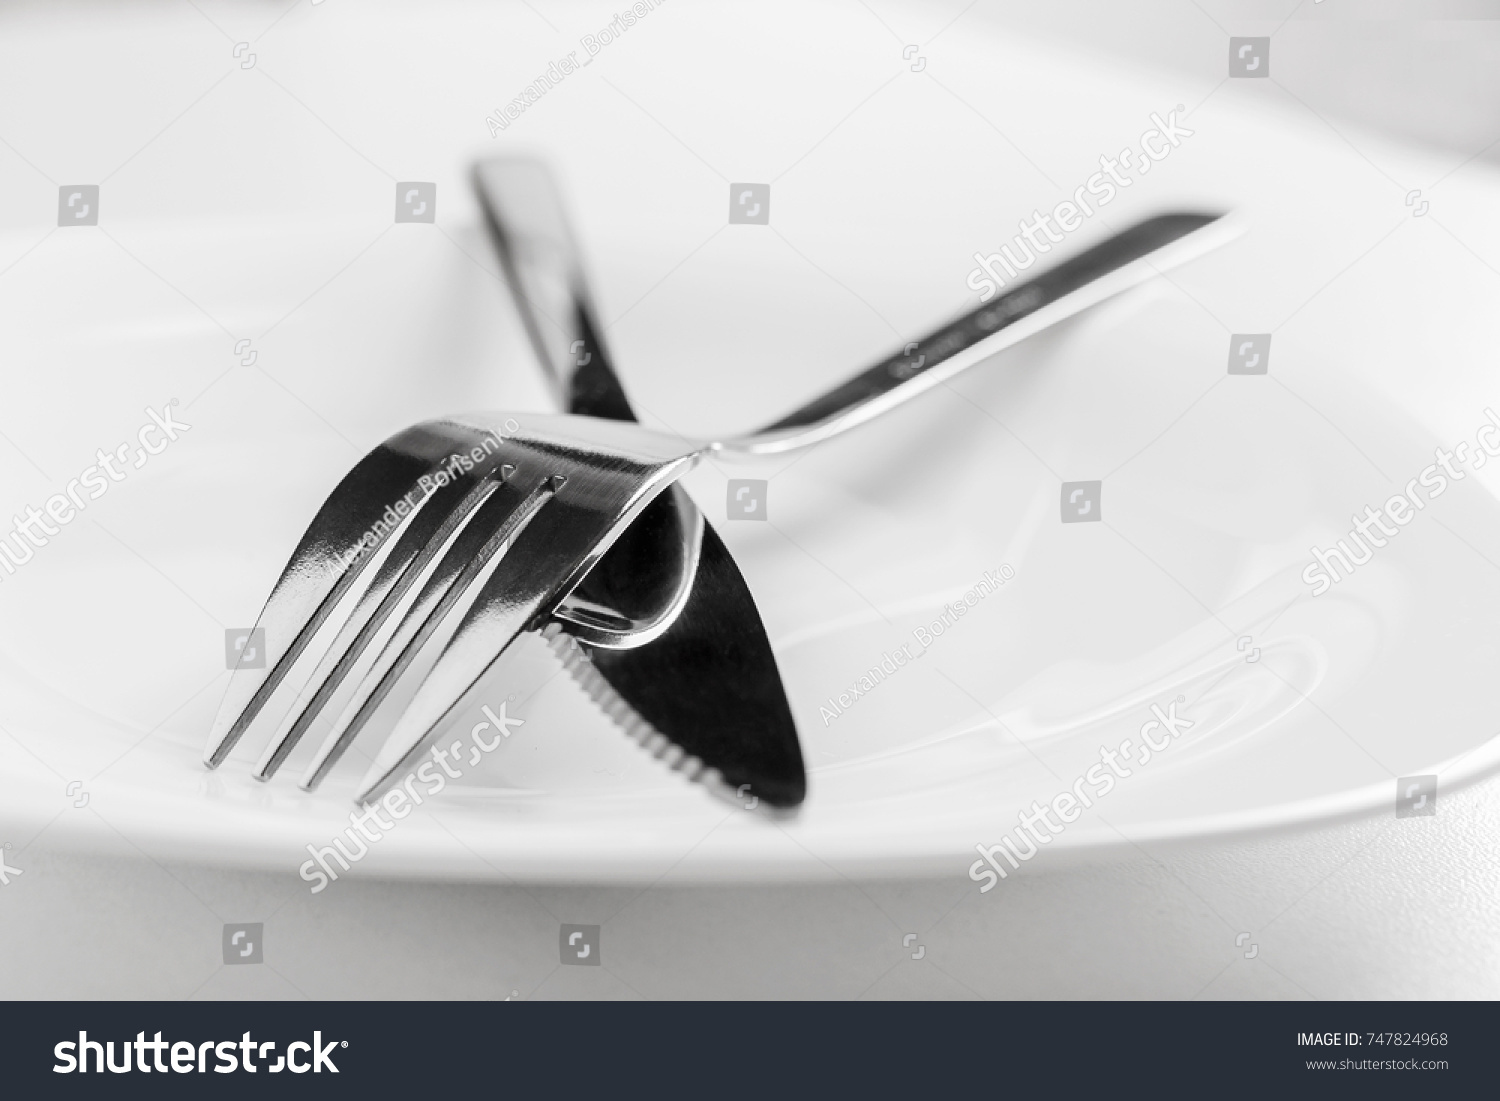 An empty plate, fork and knife lie crosswise on a white background. The dish did not like table etiquette #747824968